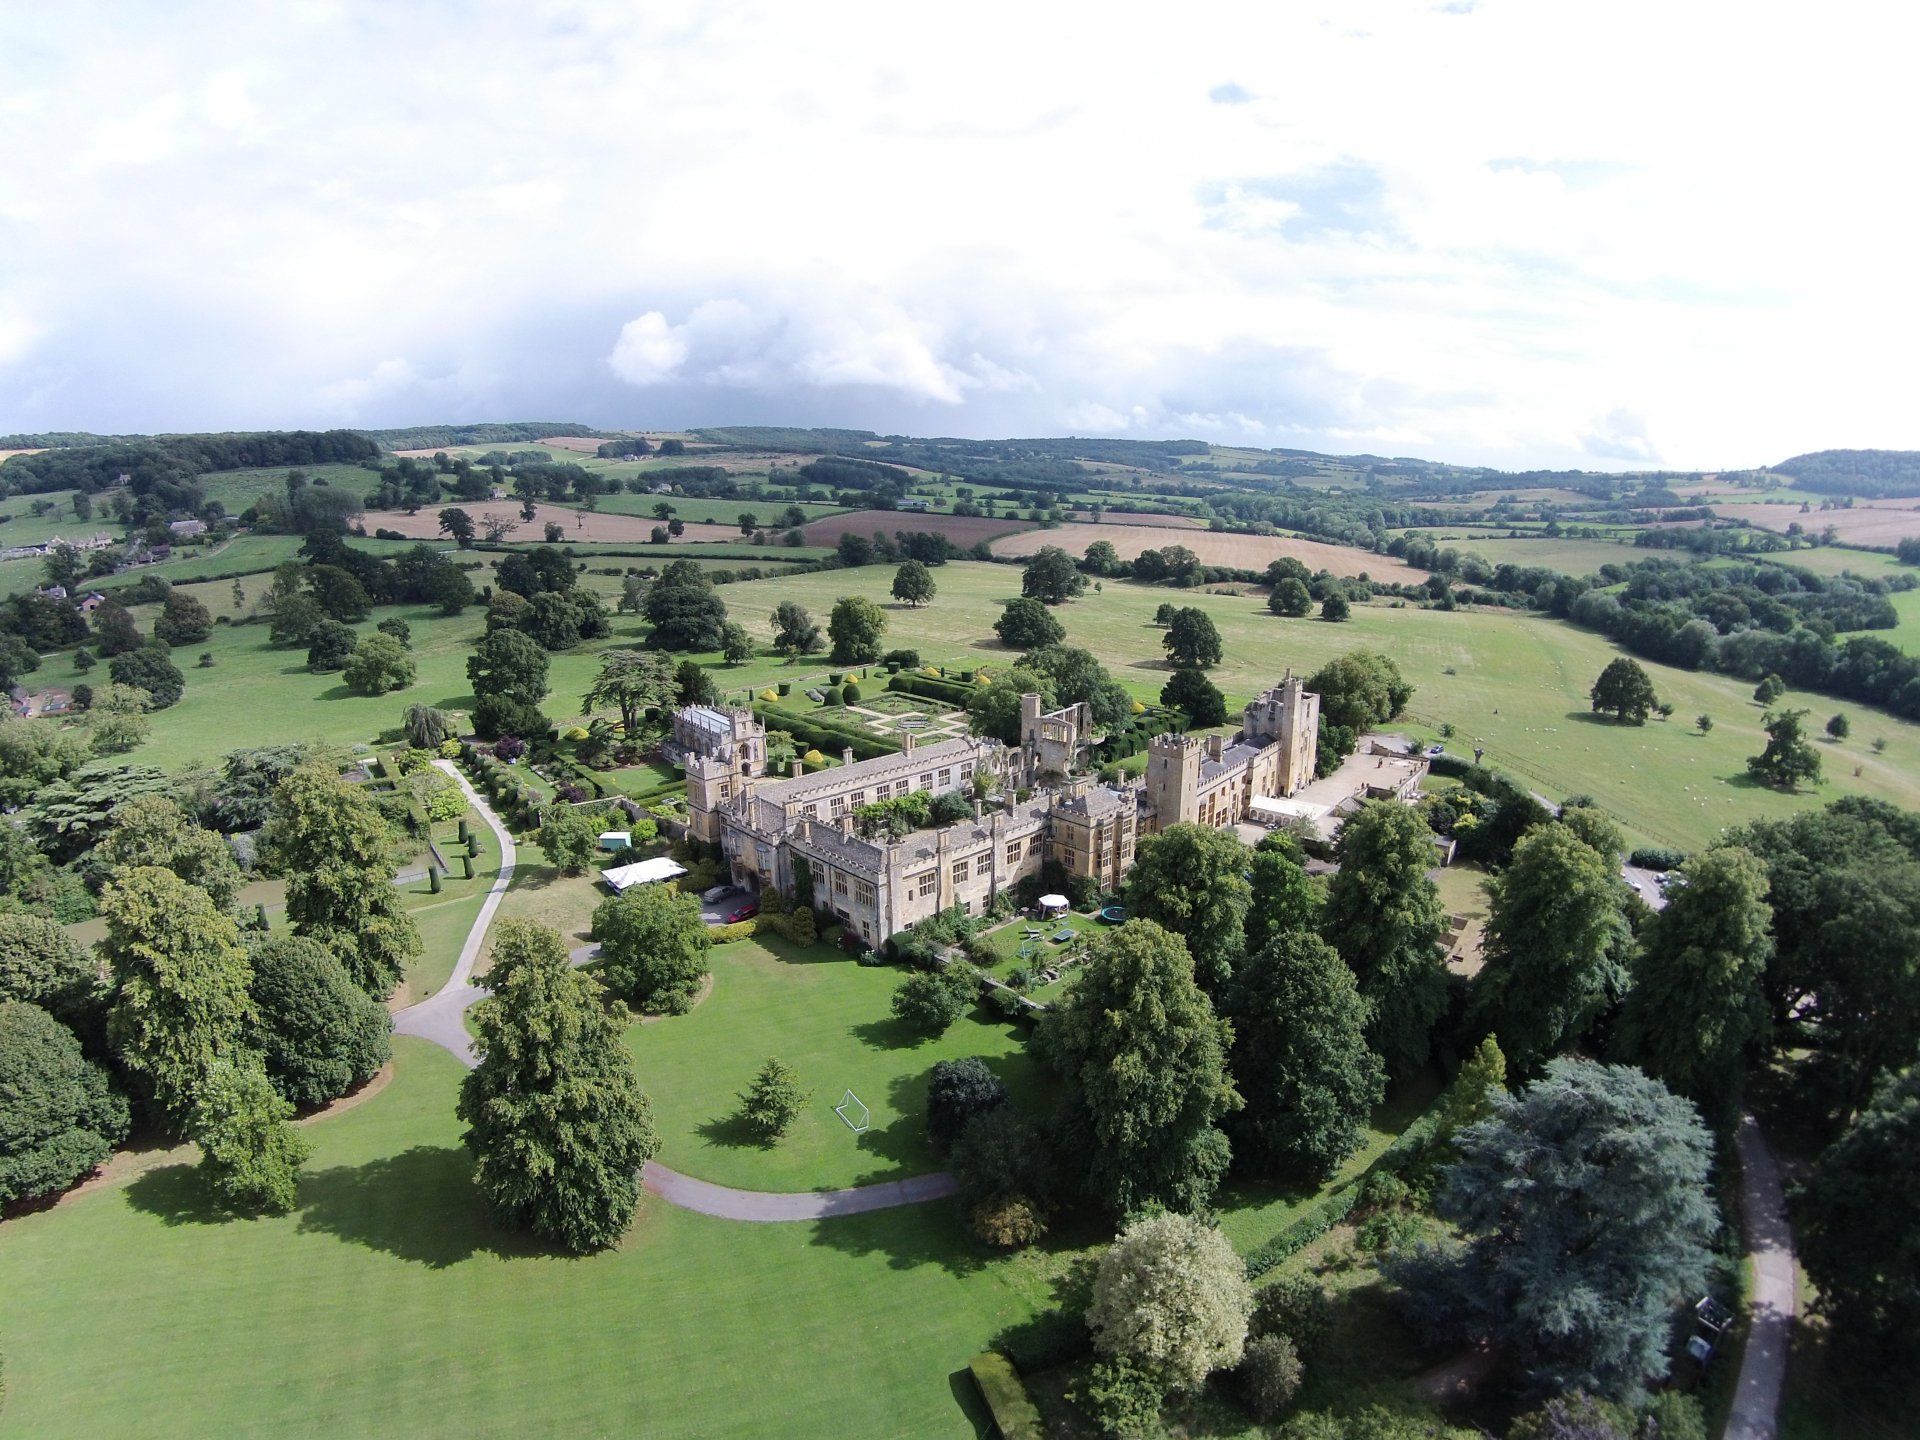 An aerial photo of Sudeley Castle by Wiebe de Jager